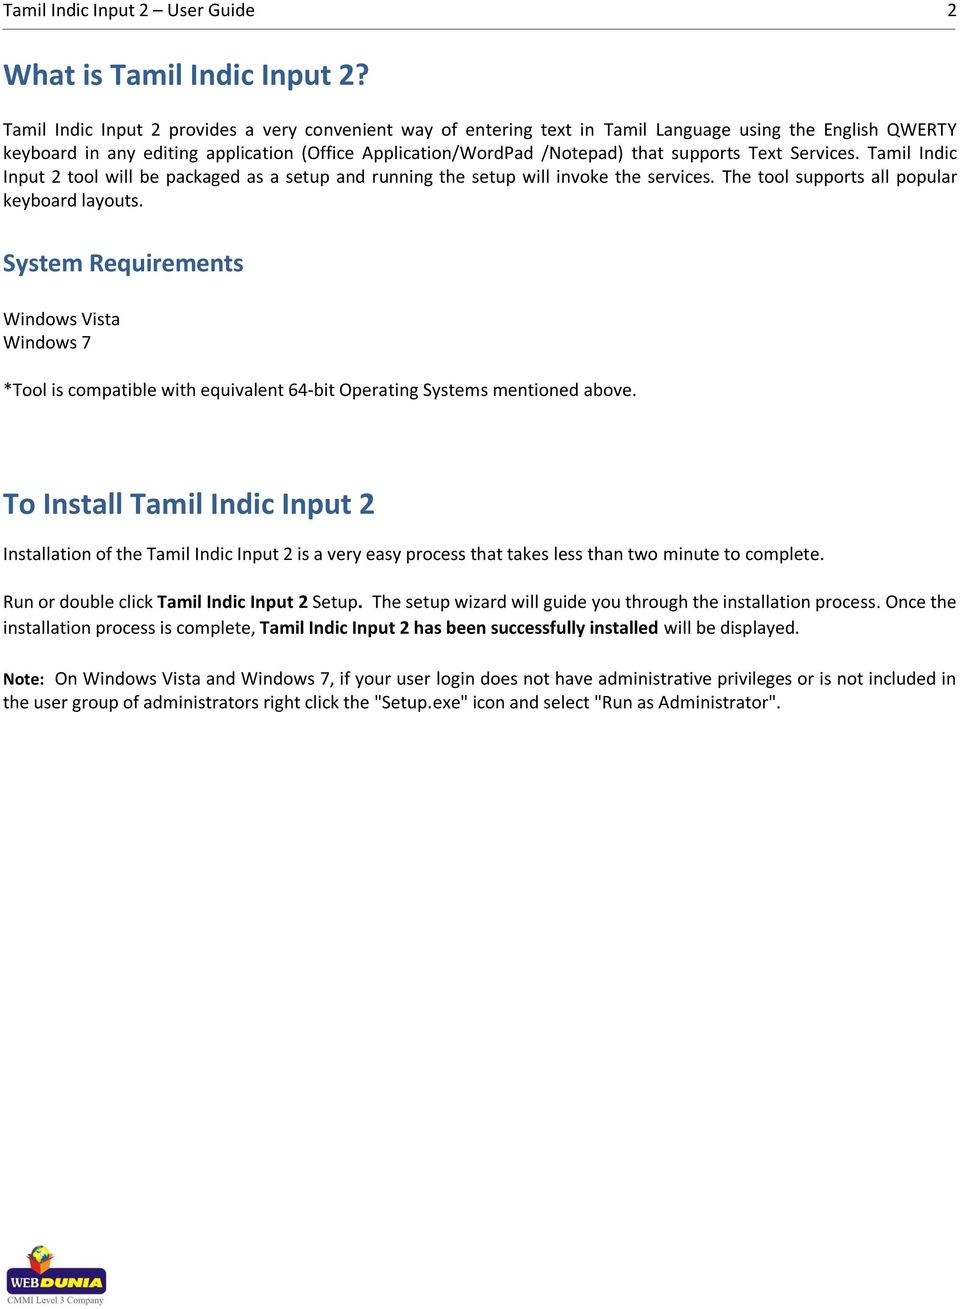 Text Services. Tamil Indic Input 2 tool will be packaged as a setup and running the setup will invoke the services. The tool supports all popular keyboard layouts.